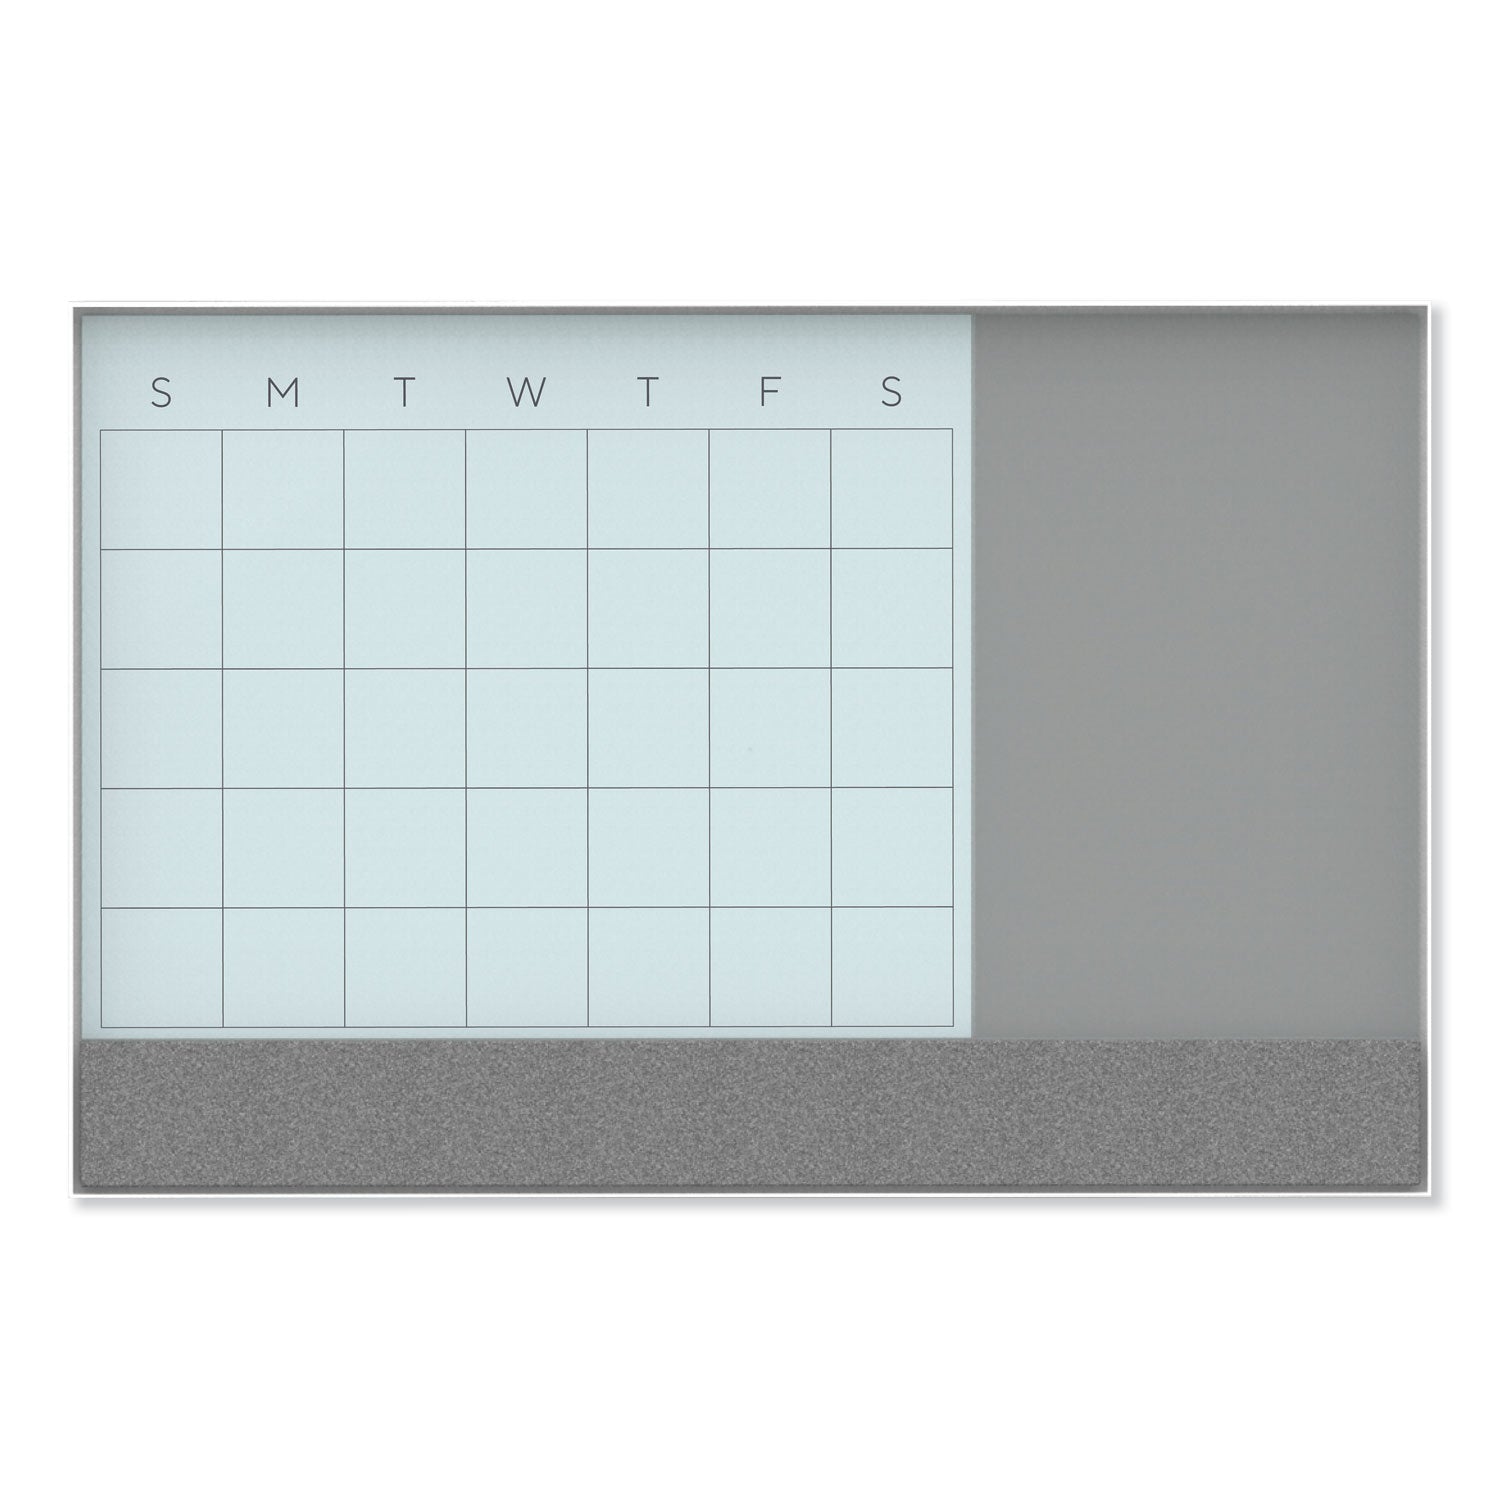 3n1-magnetic-glass-dry-erase-combo-board-23-x-17-month-view-gray-white-surface-white-aluminum-frame_ubr3196u0001 - 1